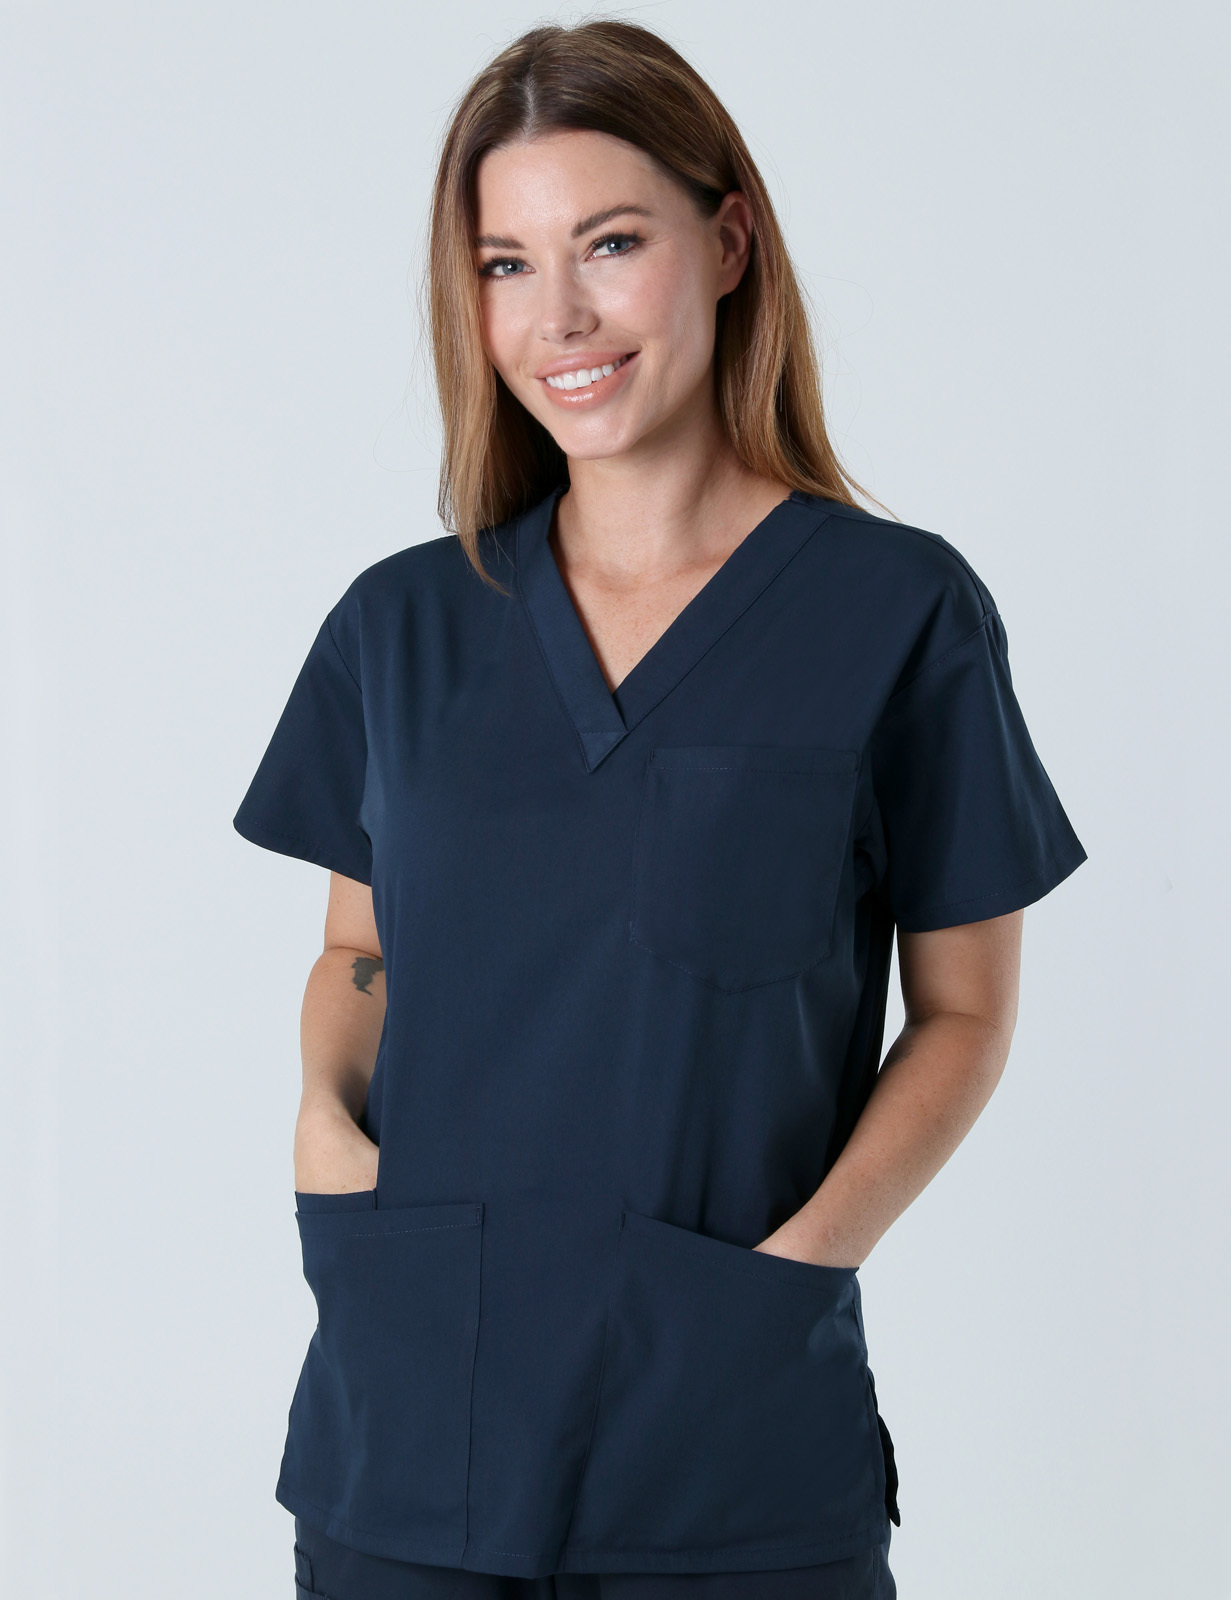 RBWH - 7A South AIN (4 Pocket Scrub Top and Cargo Pants in Navy incl Logos)